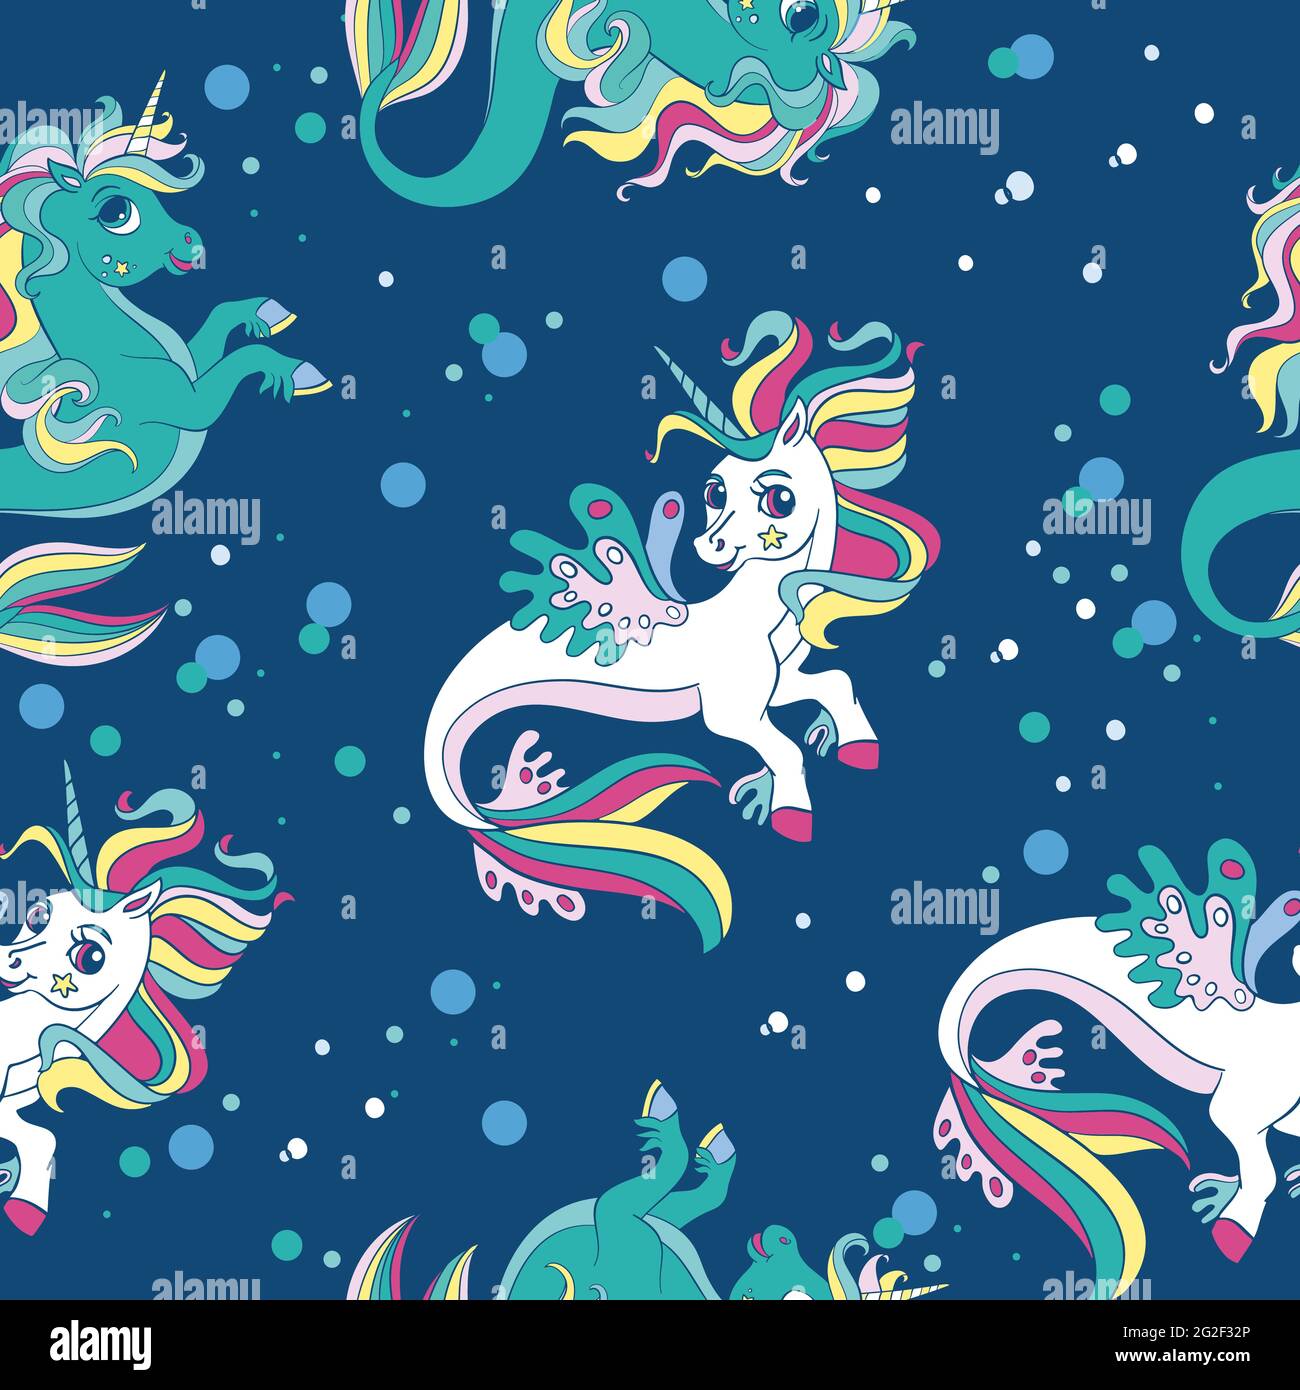 Seamless pattern with beauty sea unicorns and bubbles on blue background. Vector illustration for party, print, baby shower, wallpaper, design, decor, Stock Vector